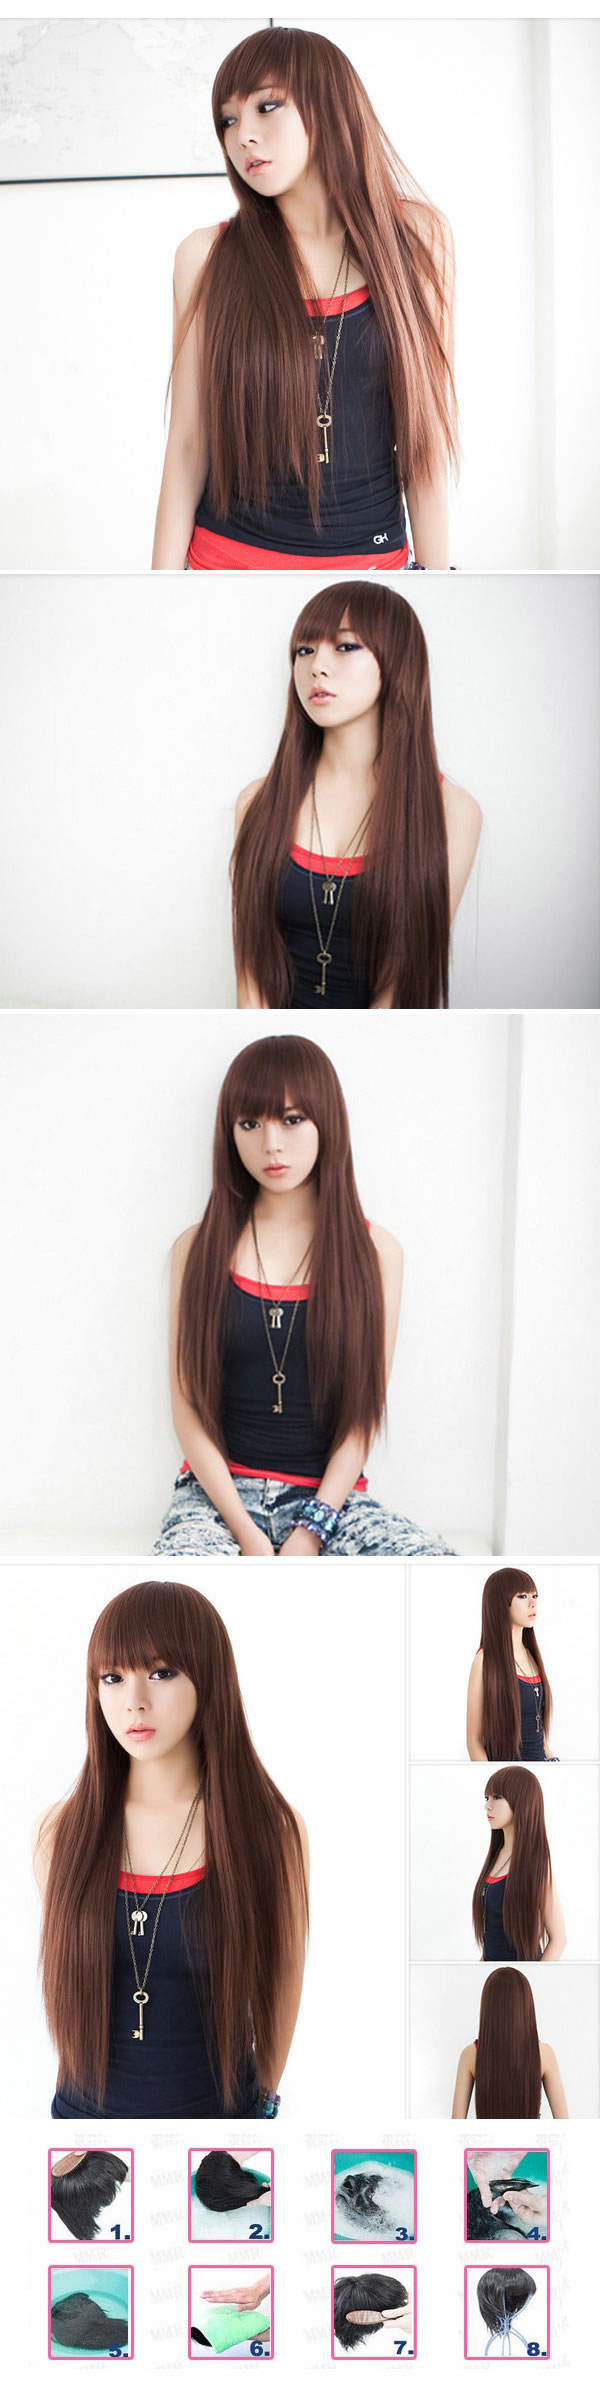 Reflective Nature Black Full Bangs In Long Straight High-Temp Fiber Wigs,Wigs